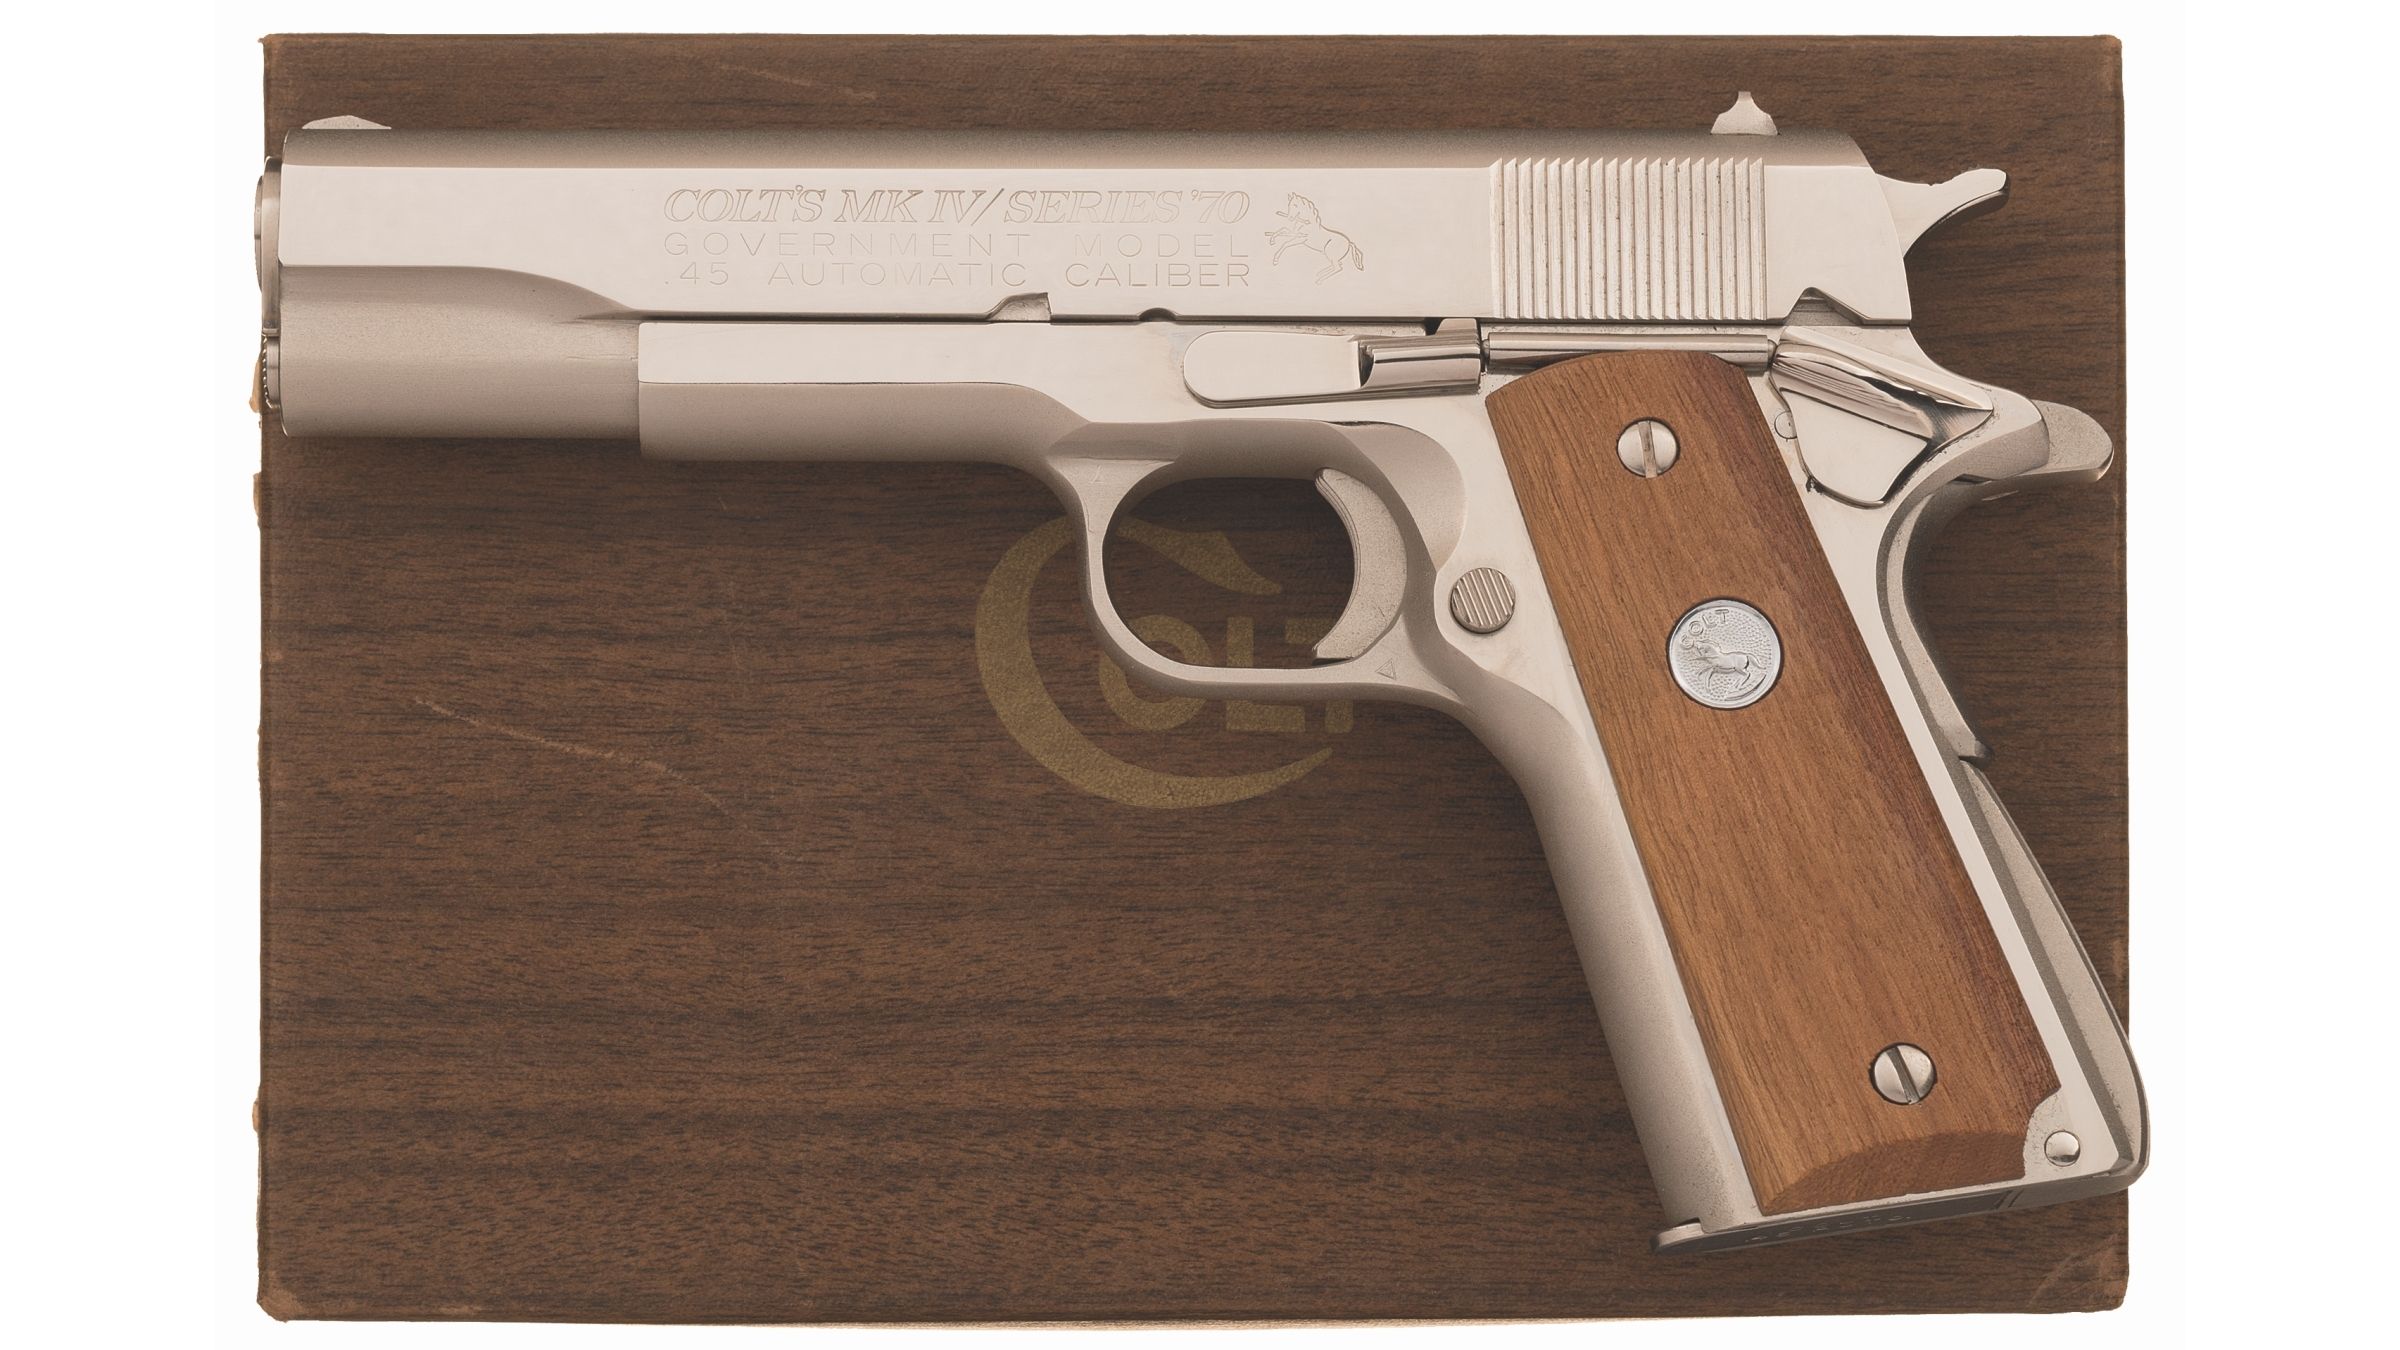 Nickel Colt Mk IV Series 70 Government Model Pistol with Box